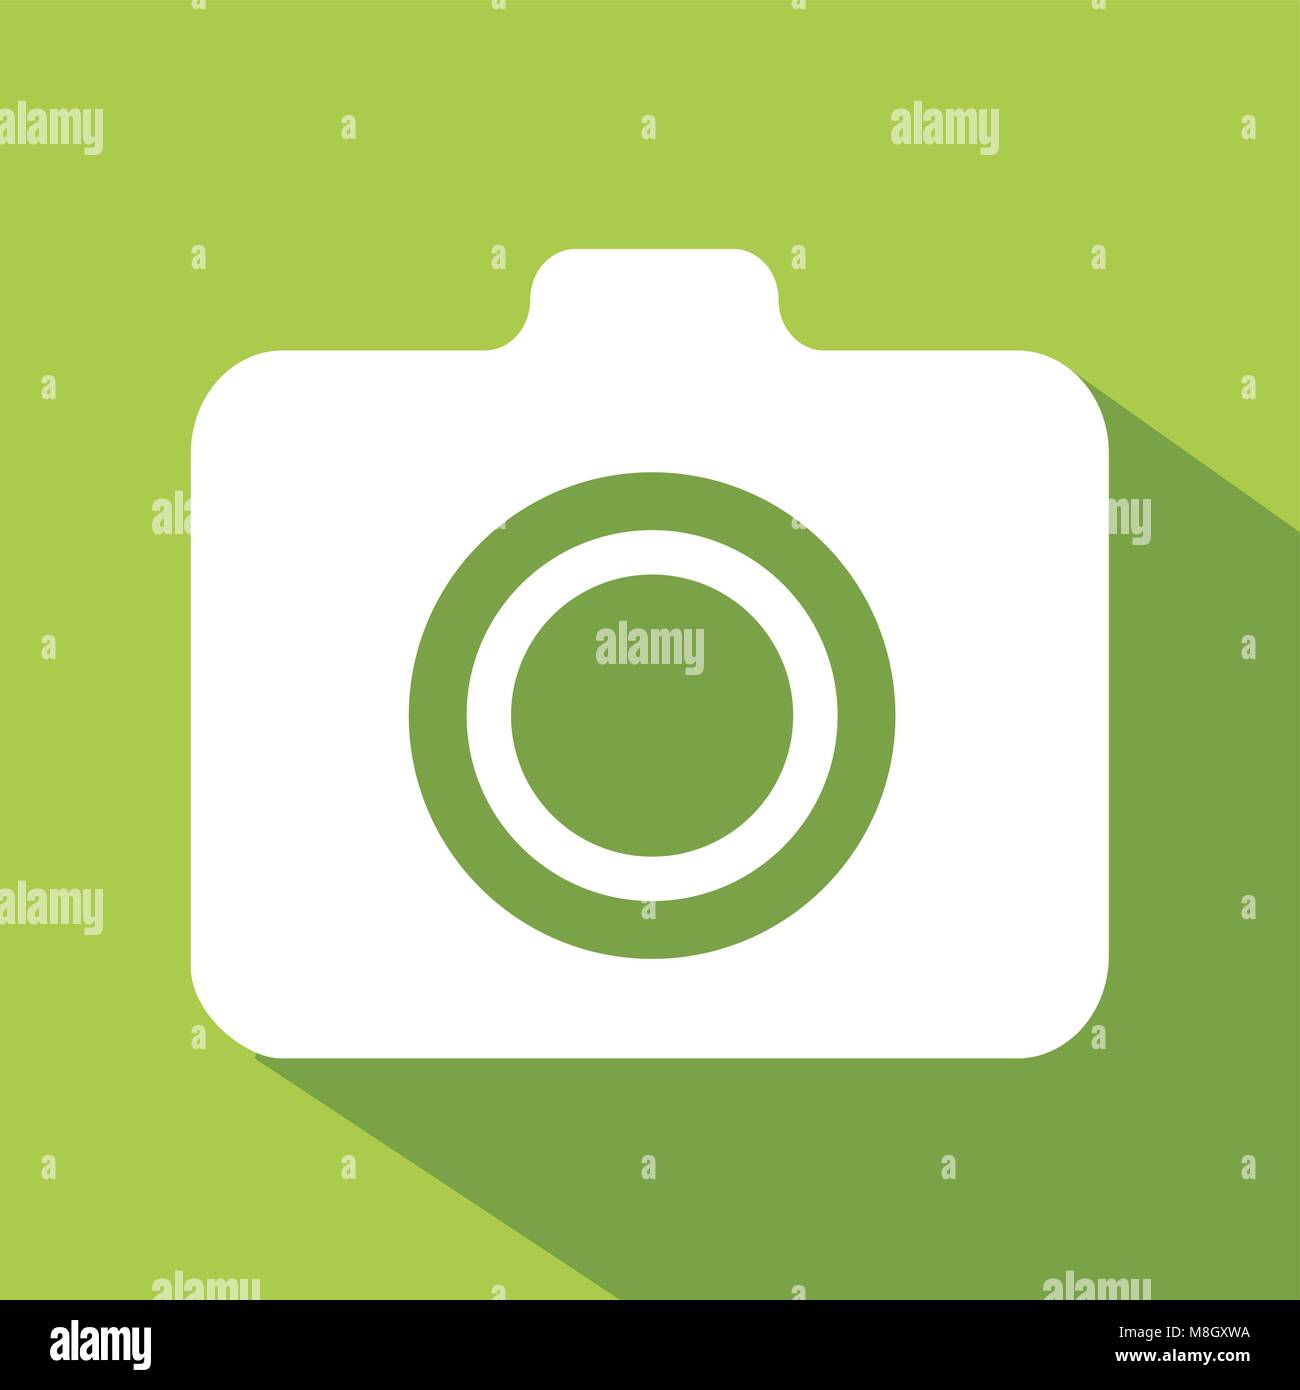 Design Vector Of Flat Icon With Concept Camera Stock Vector Image Art Alamy